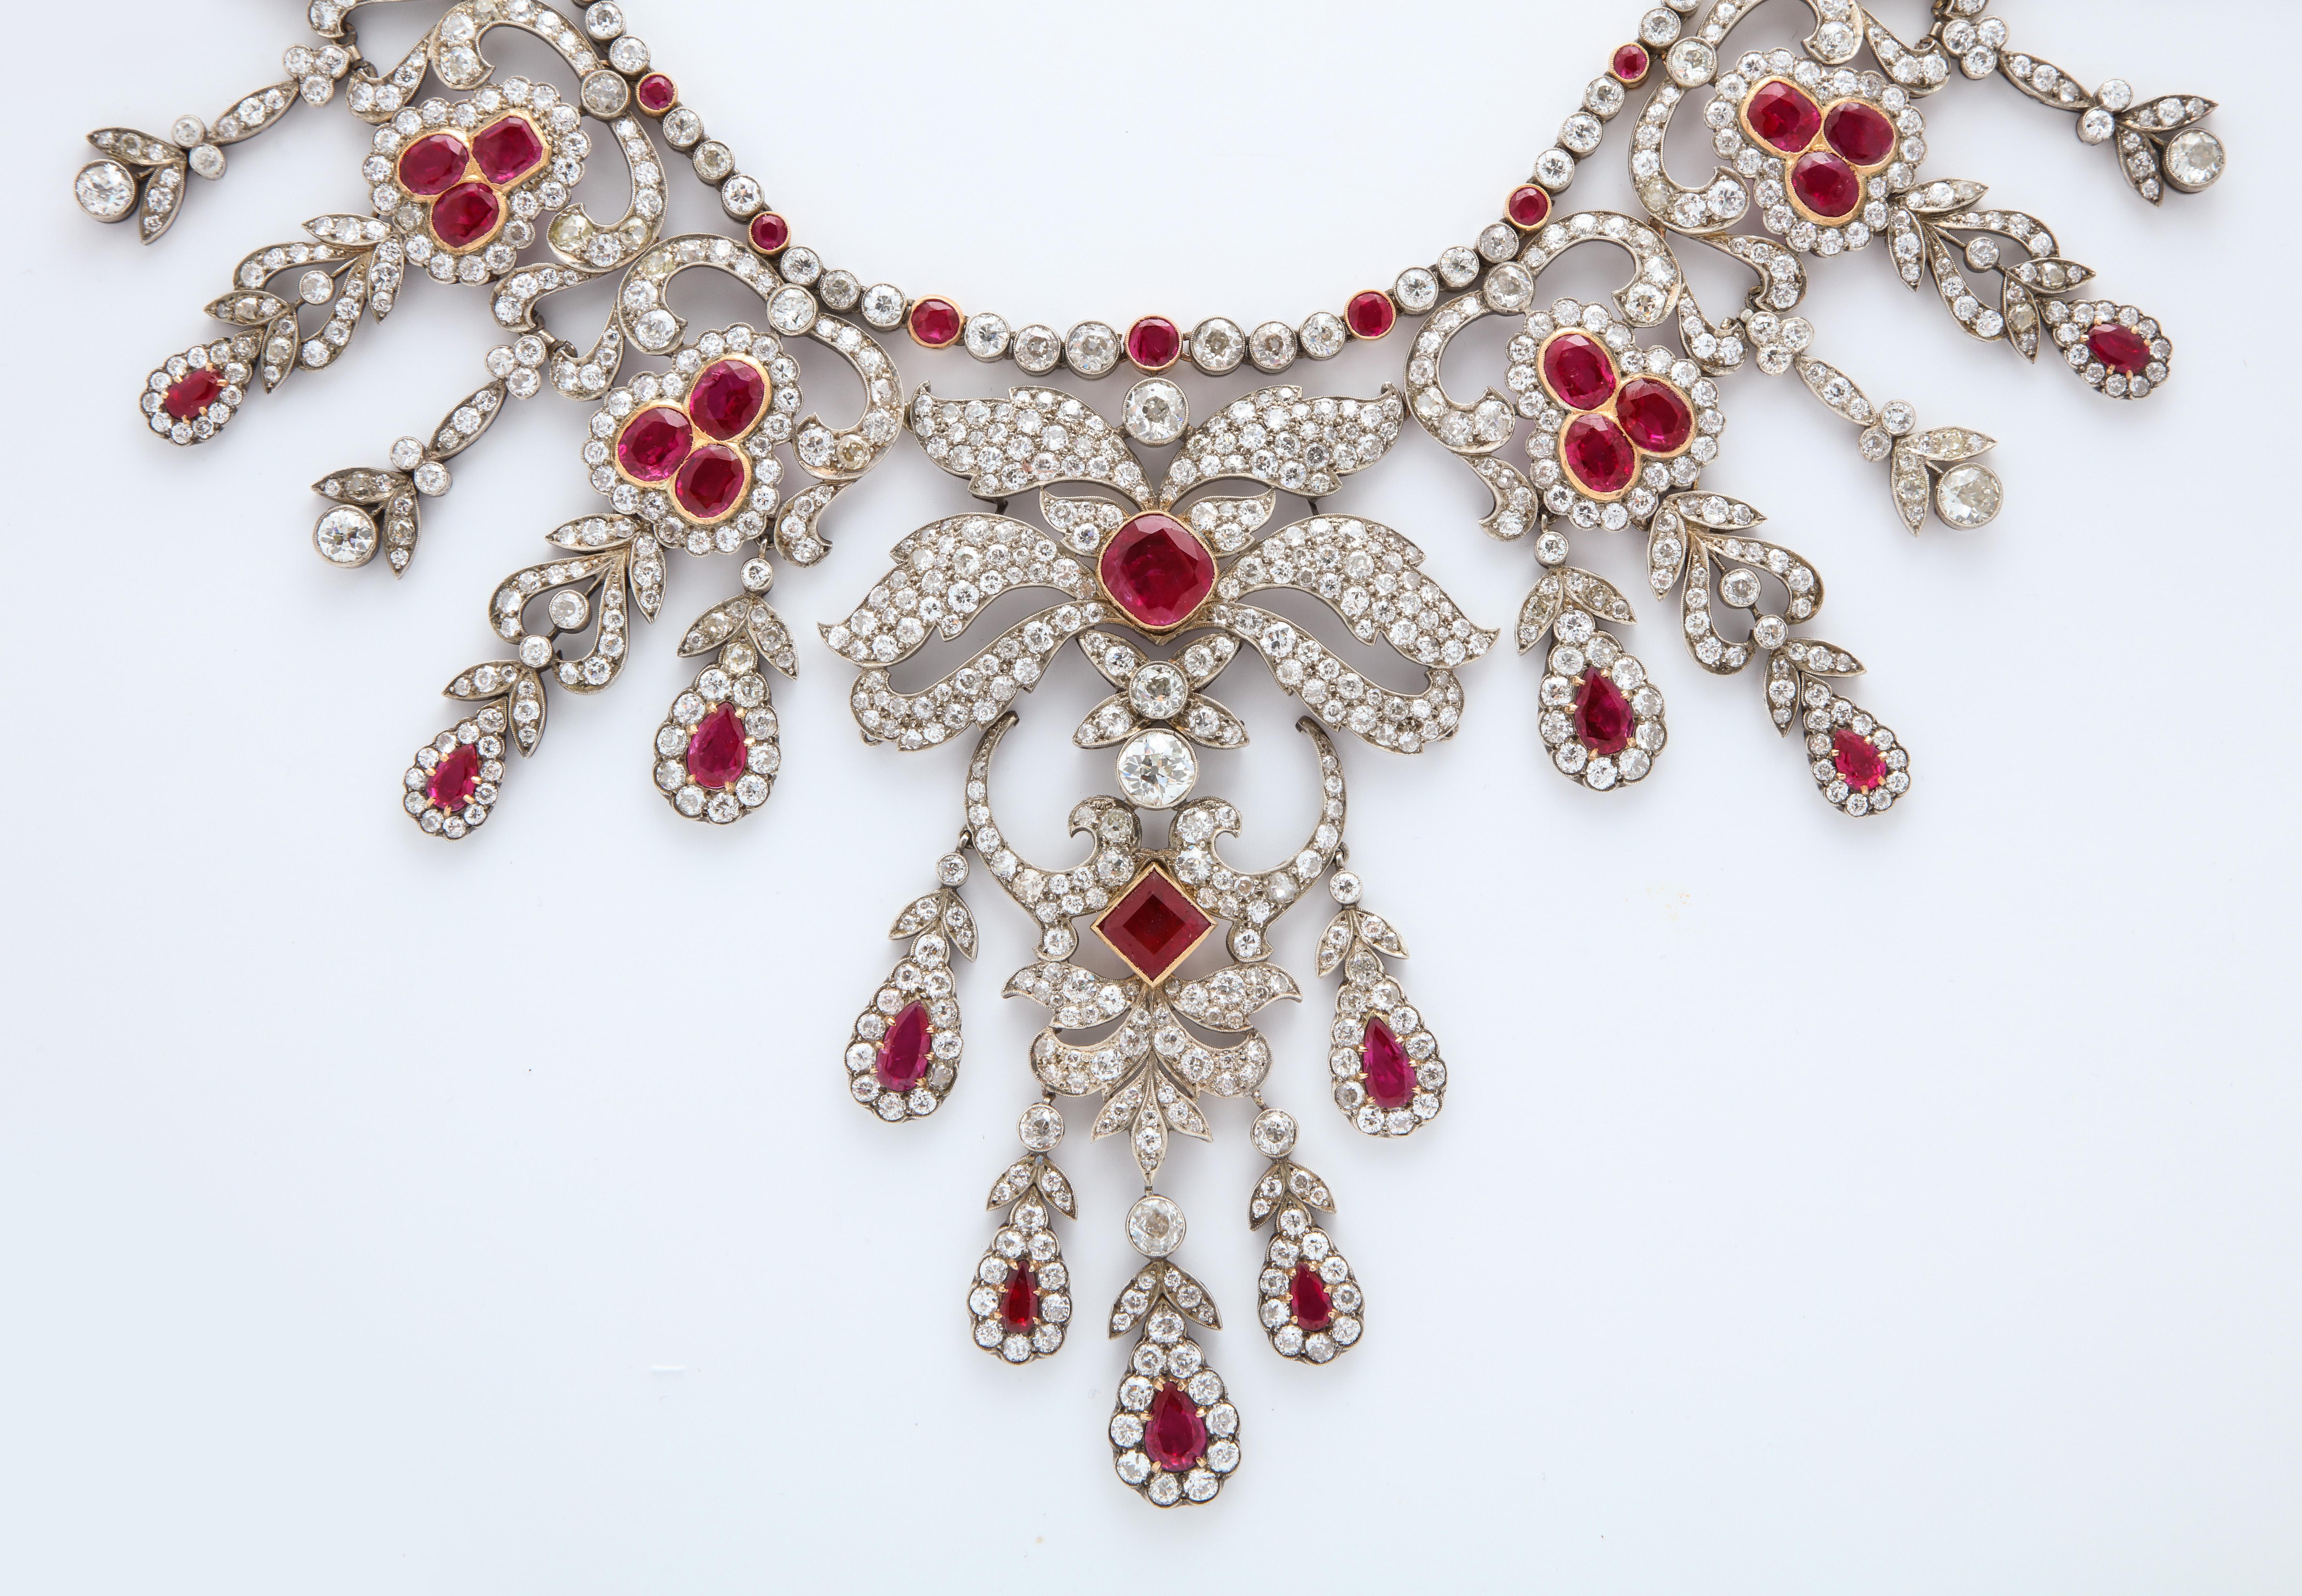 A monumental and historic Belle Epoque necklace.

Featuring a once in a lifetime collection of over 100 carats of unheated Burmese rubies.

With approx 100 carats of antique cut diamonds.

Made circa 1910 on commission for a Maharajah 